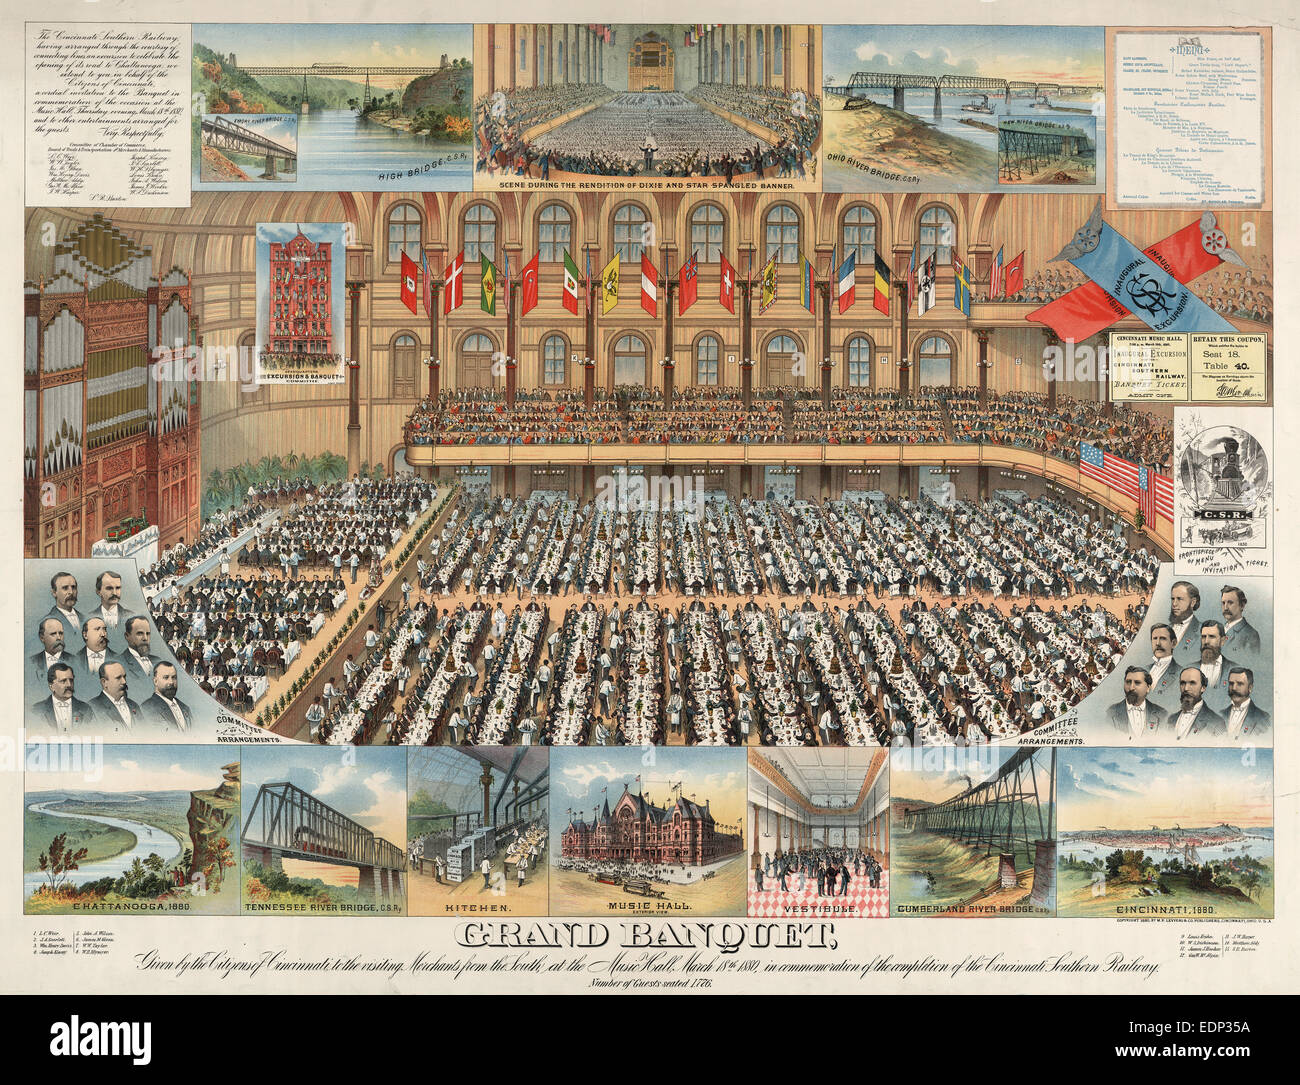 Grand banquet, given by the citizens of Cincinnati, to the visiting merchants from the south, at the Music Hall, March 18th 1880 Stock Photo